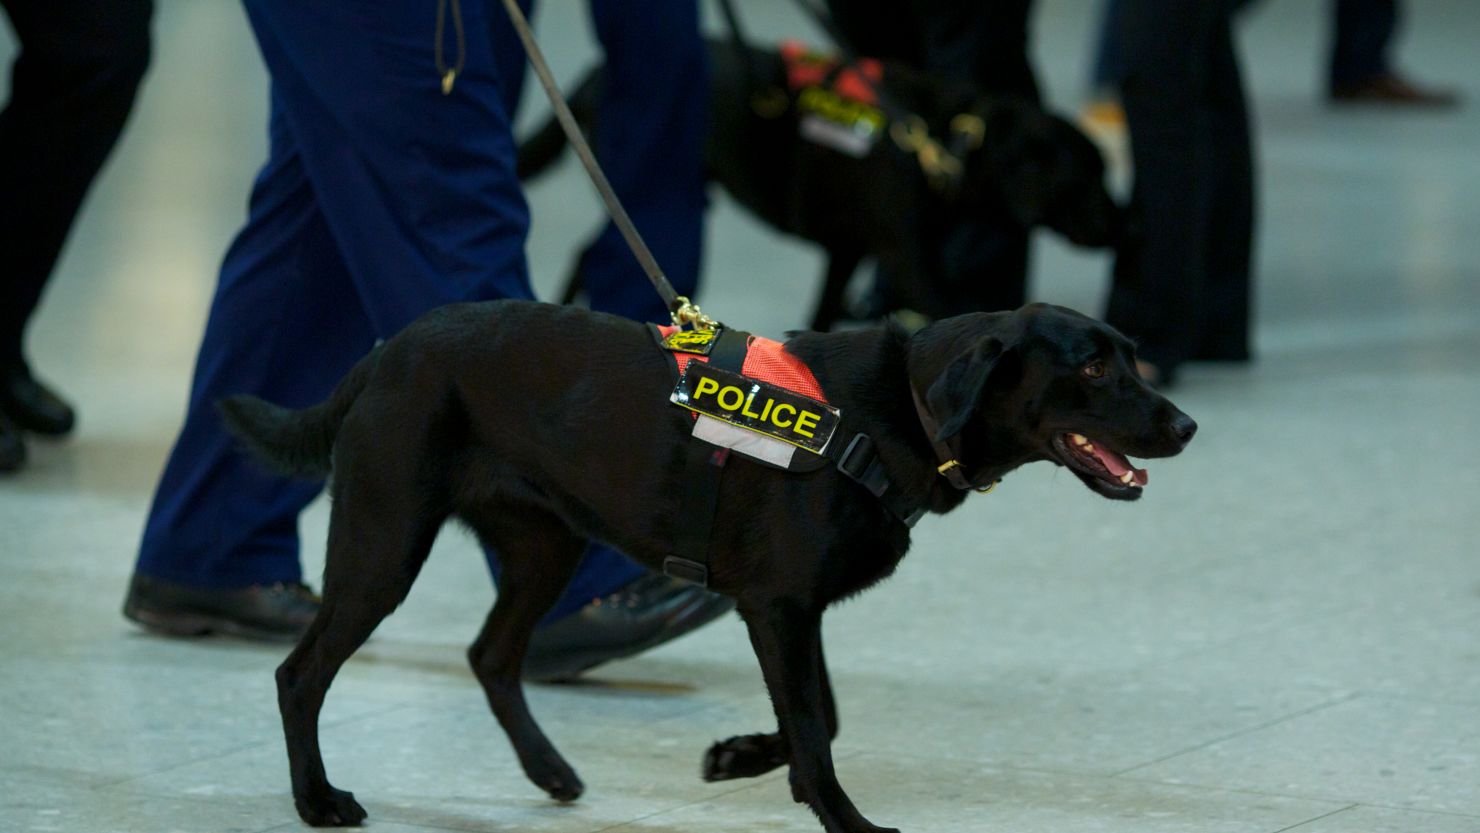 Canine crimefighters in Staffordshire in England's West Midlands region, will have cameras strapped to their heads.